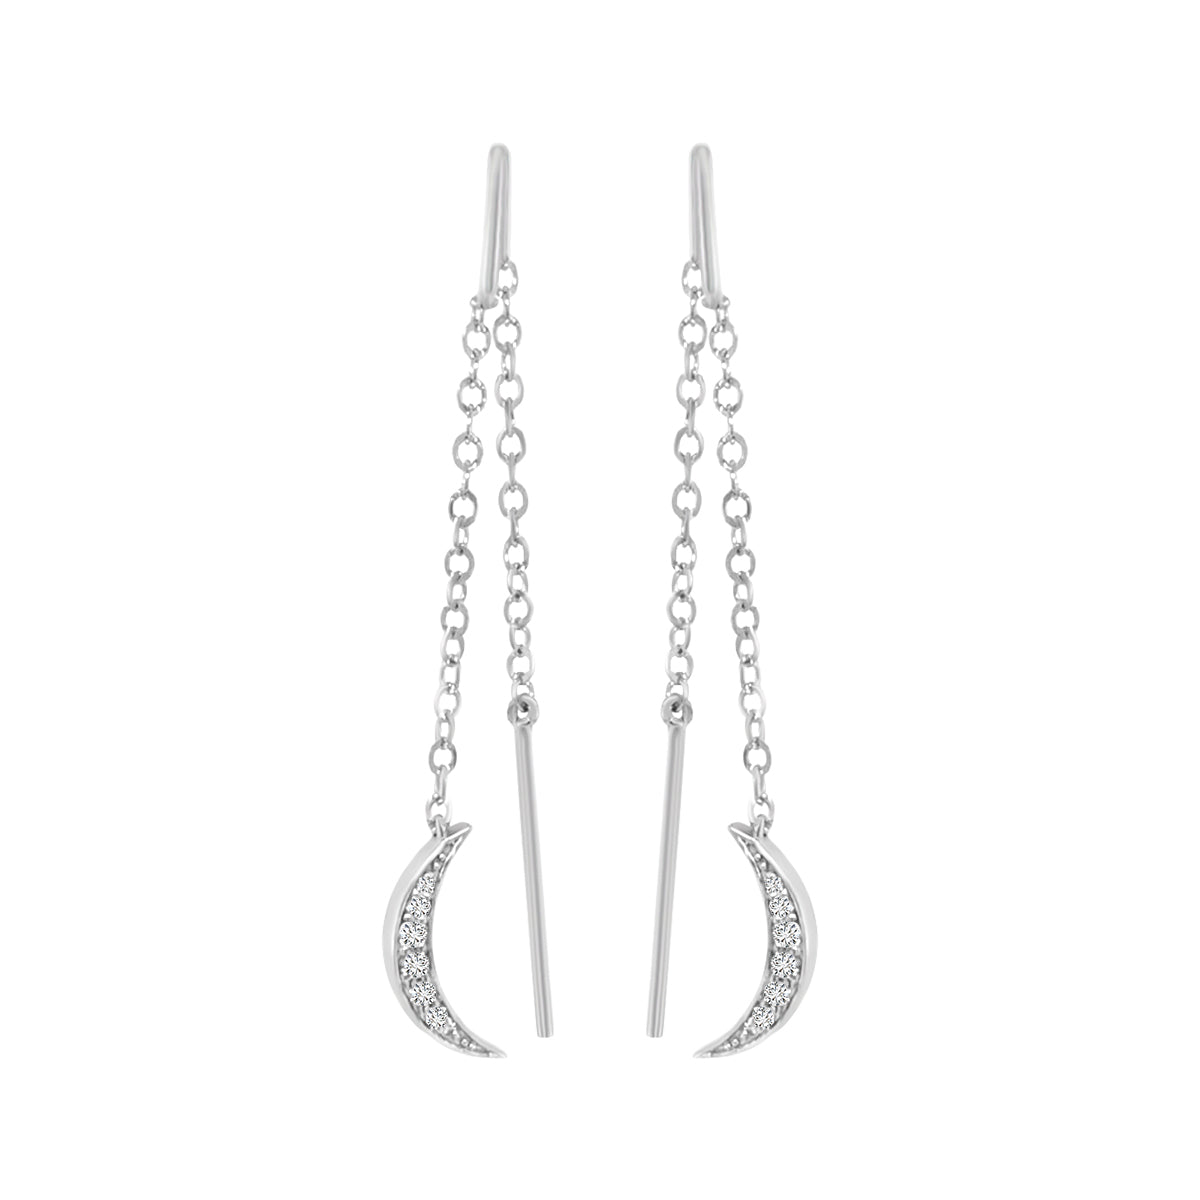 Needle And Thread Earrings With Half Moon Charm In 18k White Gold.